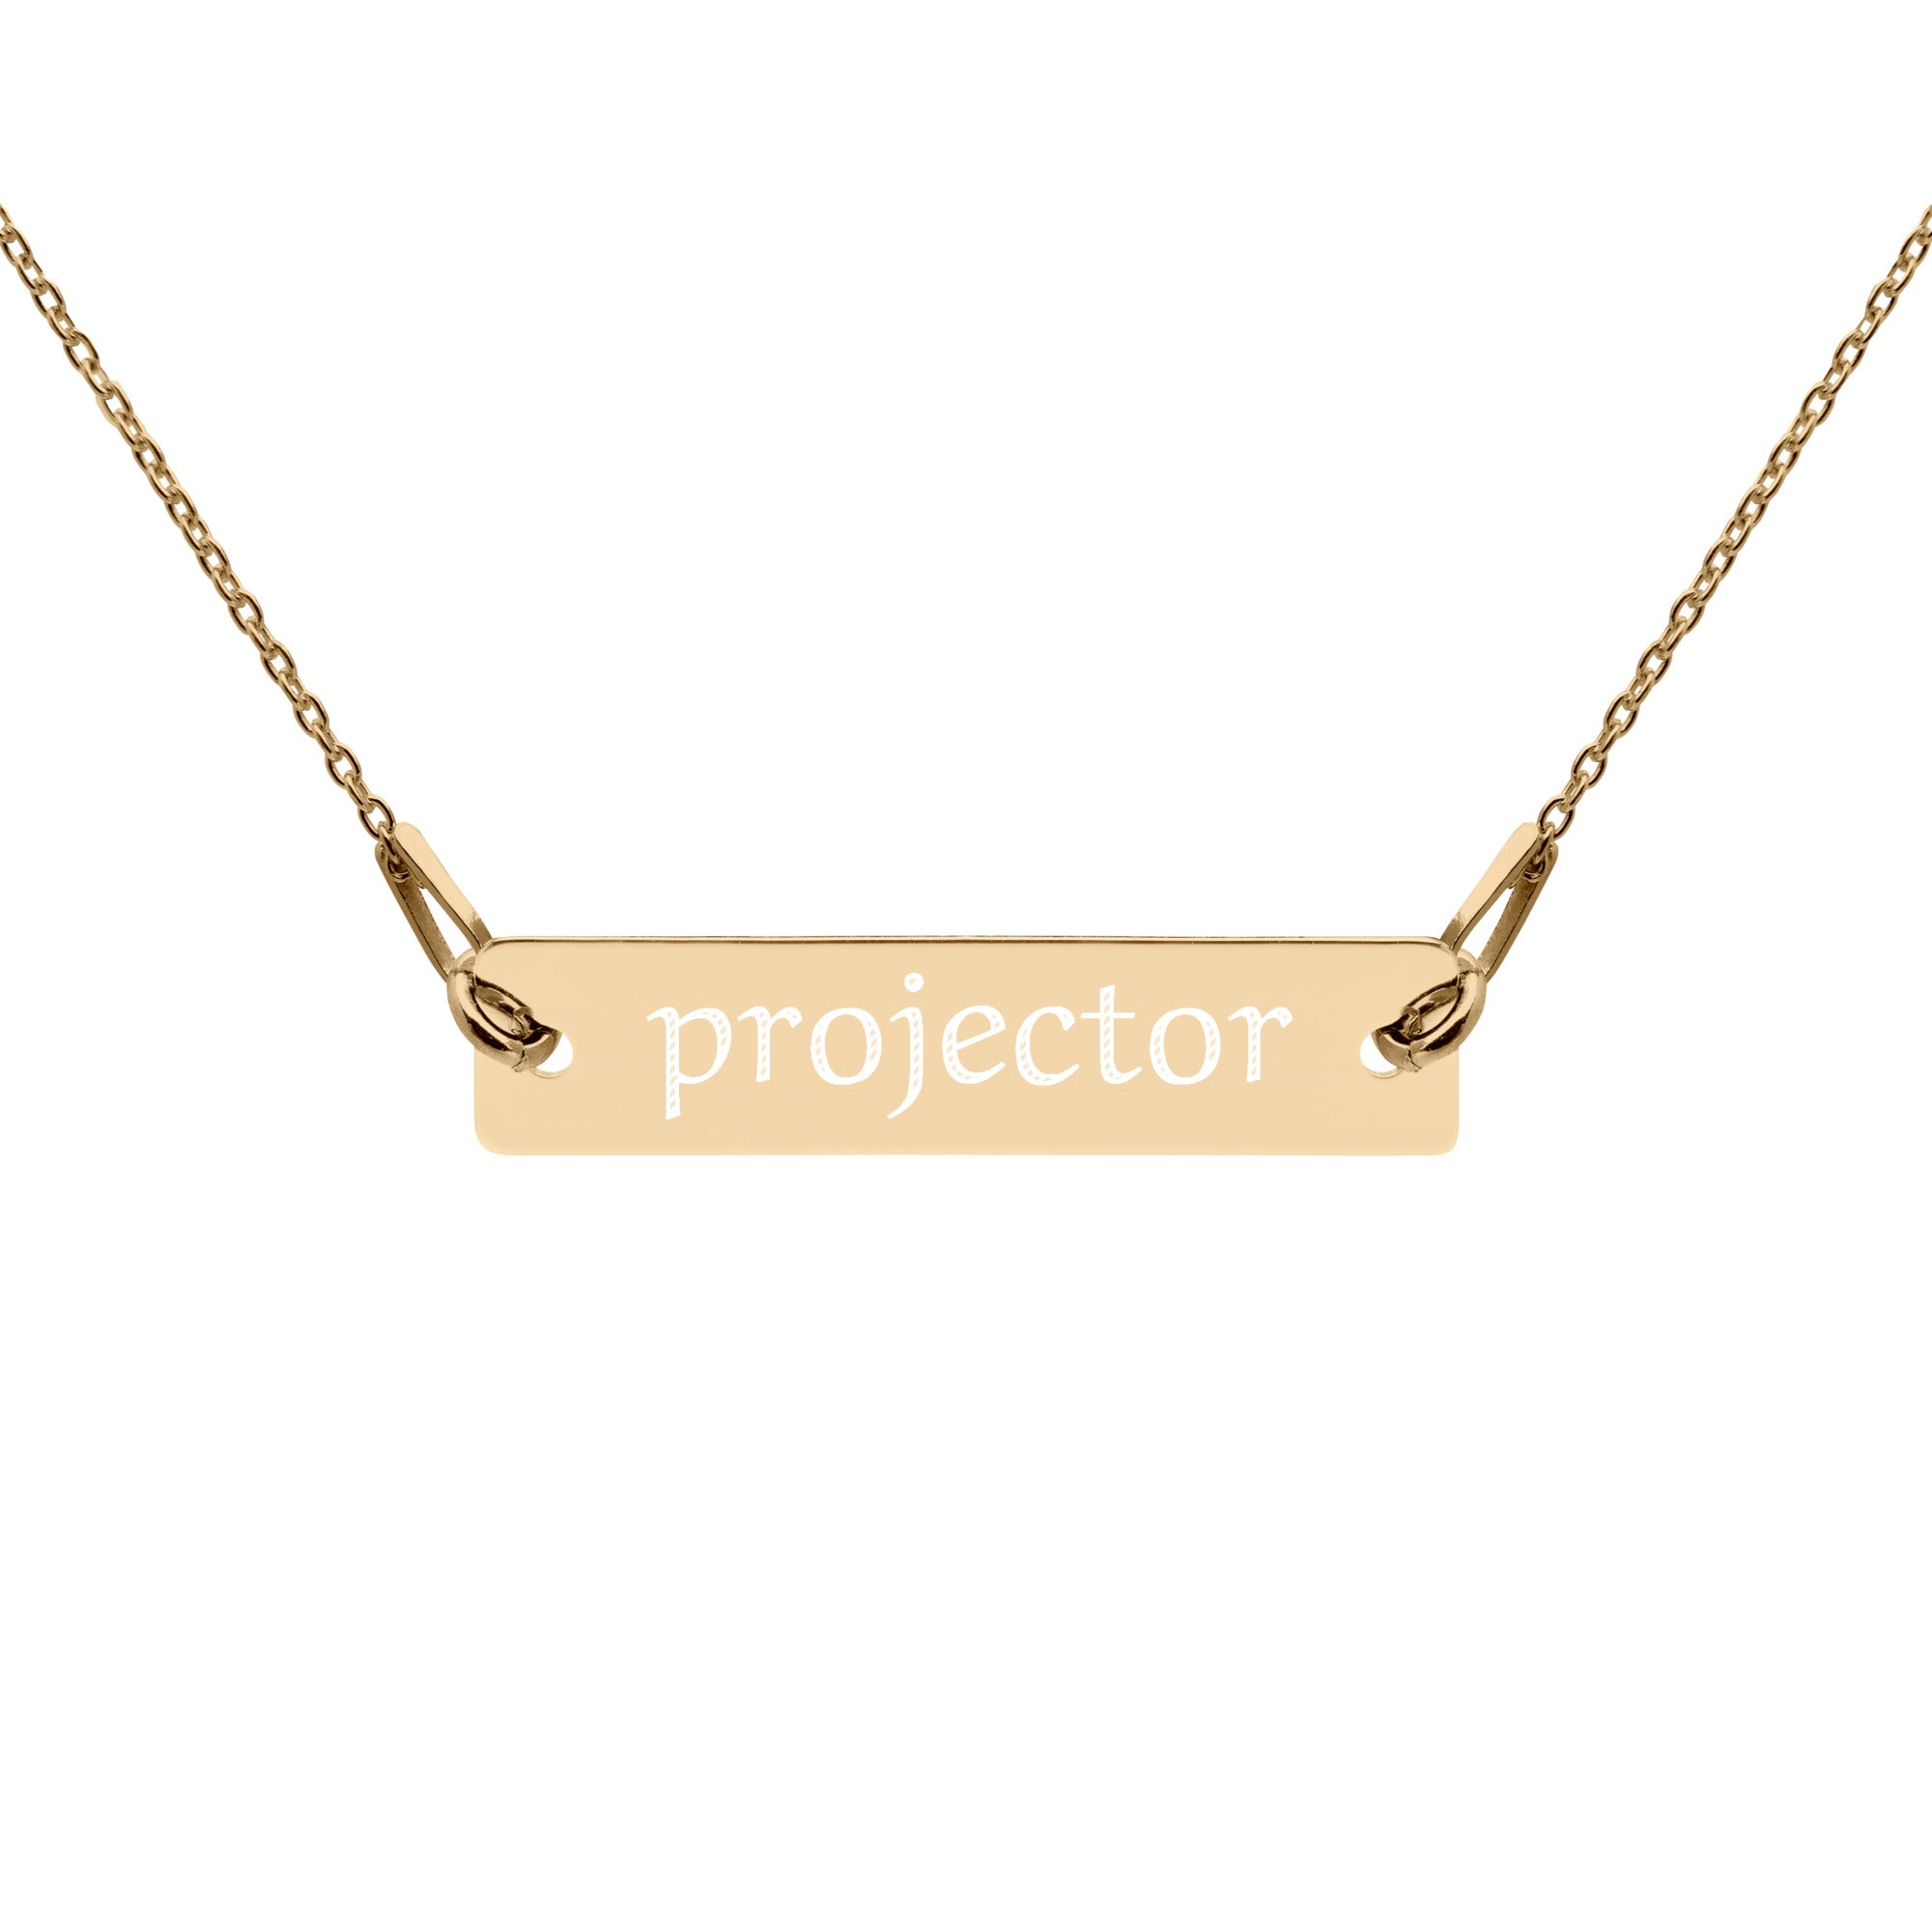 24K Gold* Projector Necklace